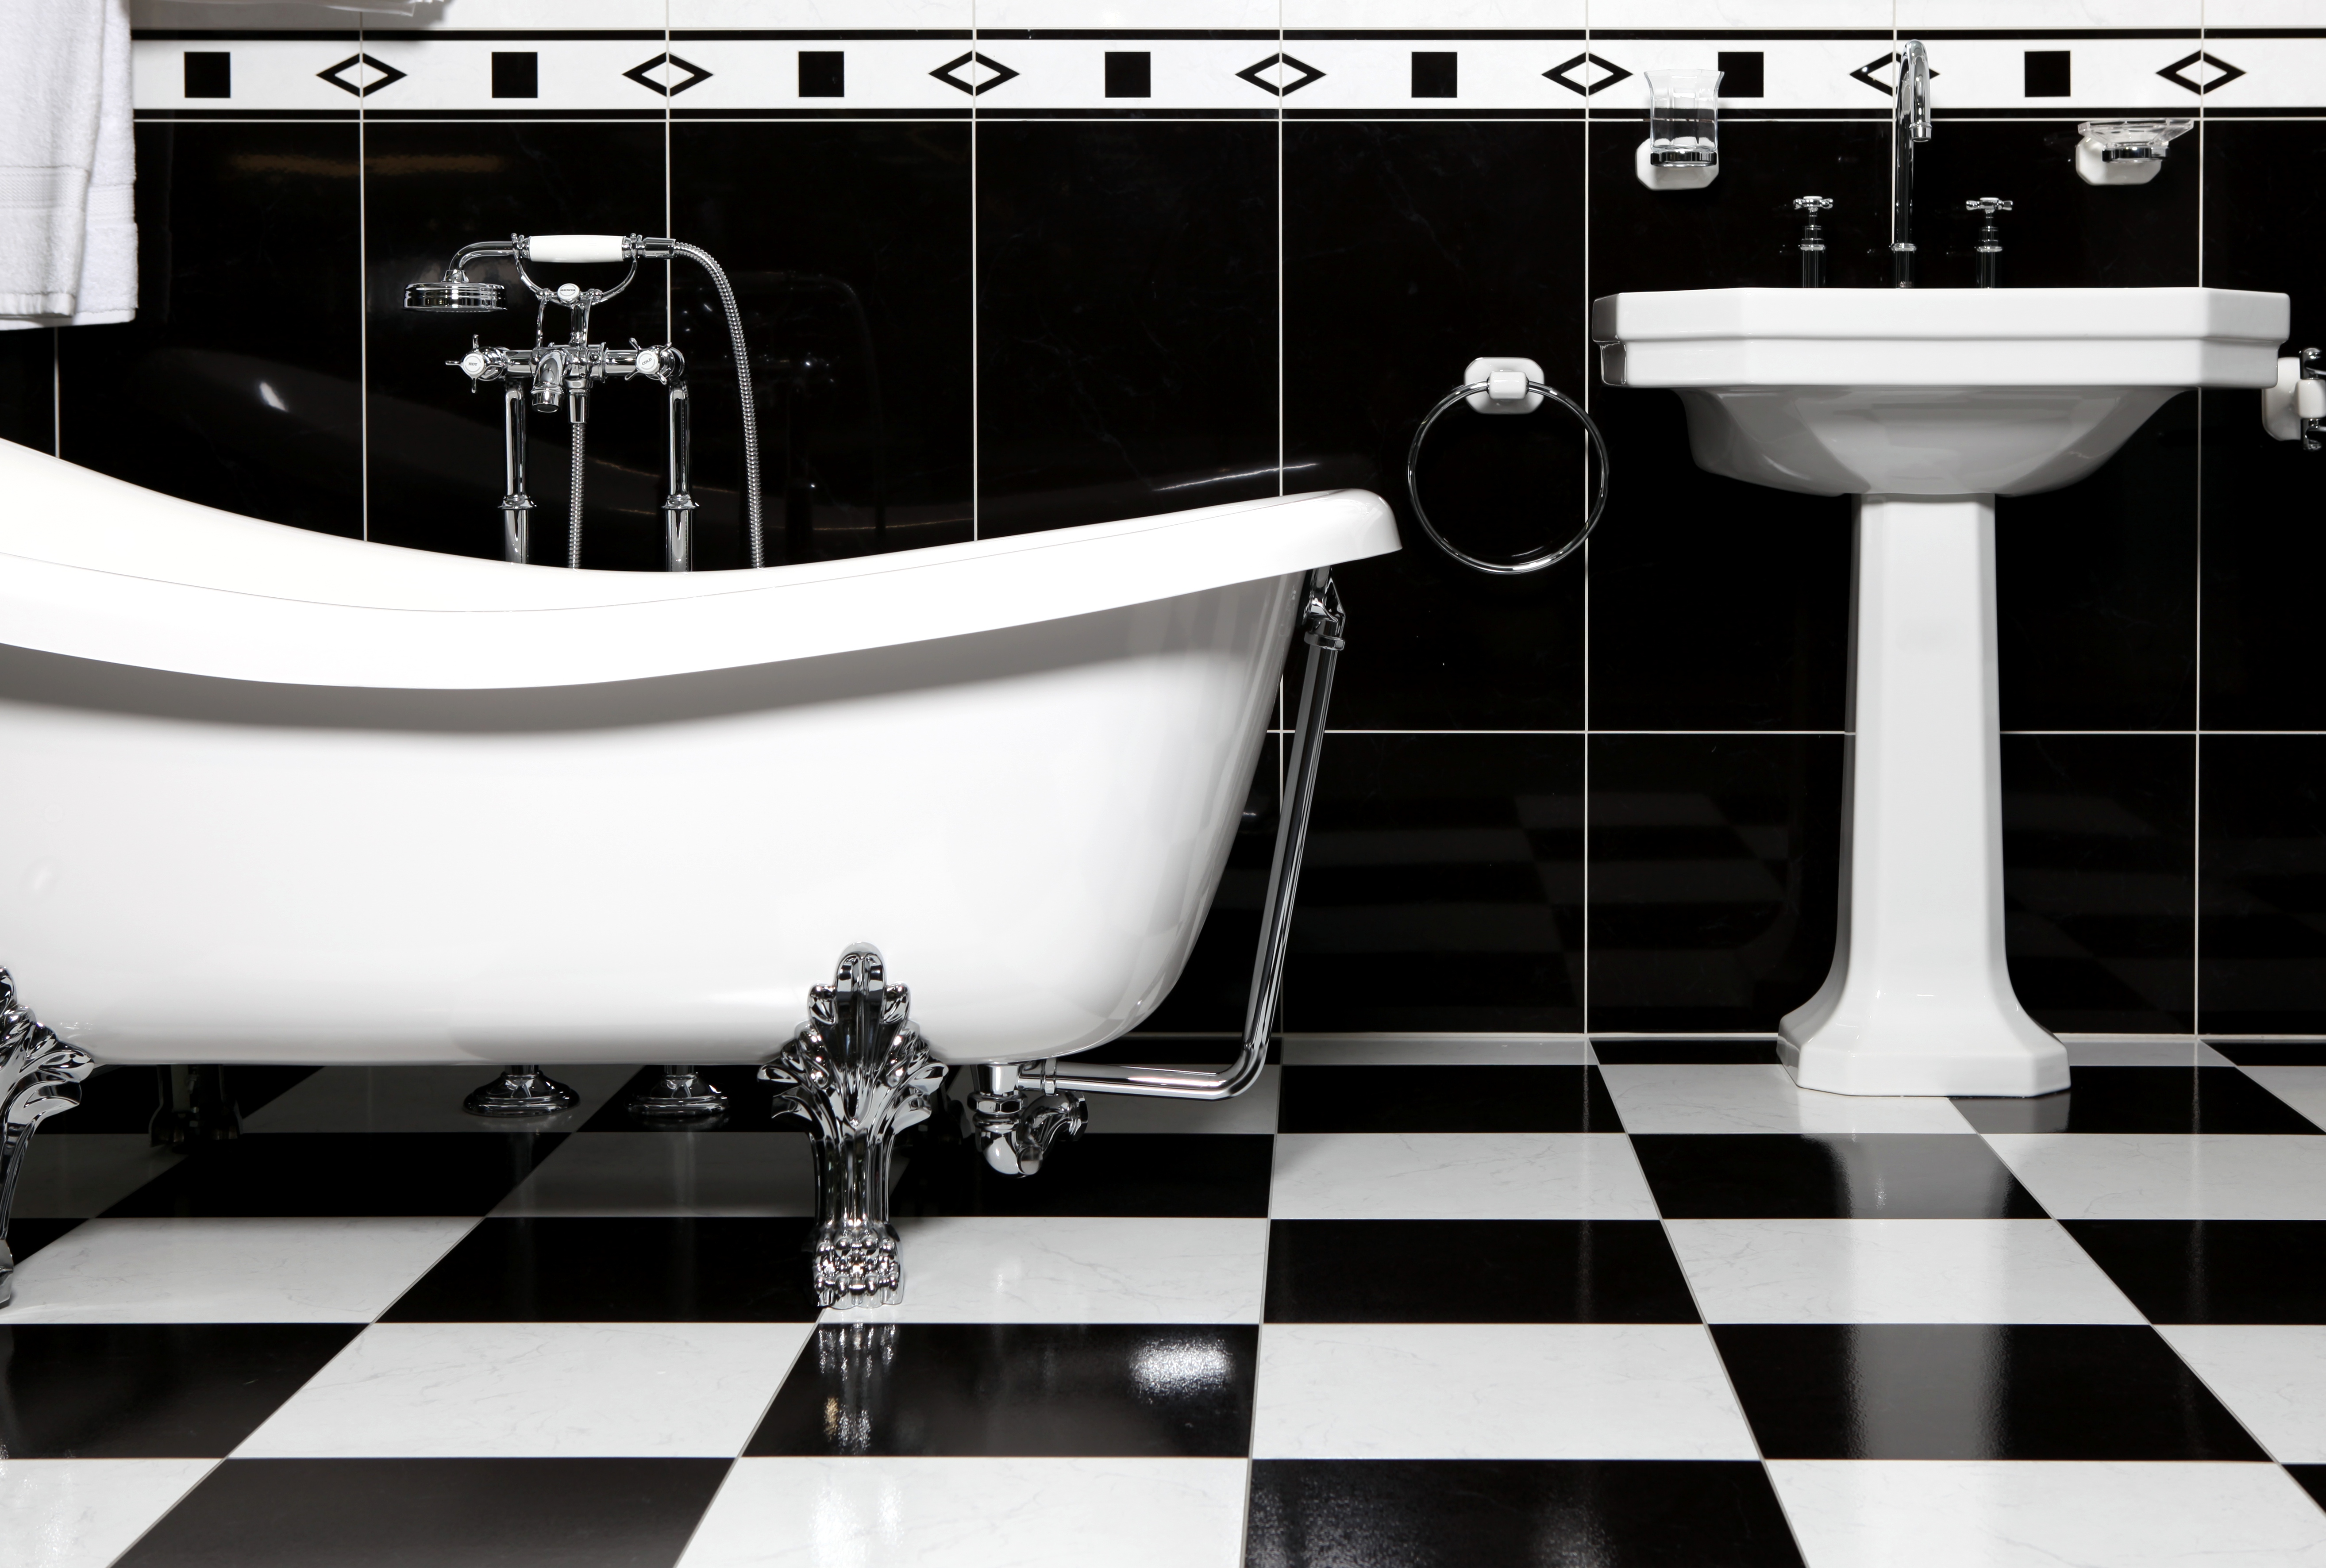 Emphasise-the-contrast-between-the-black-and-the-white-in-a-checkered-bathroom